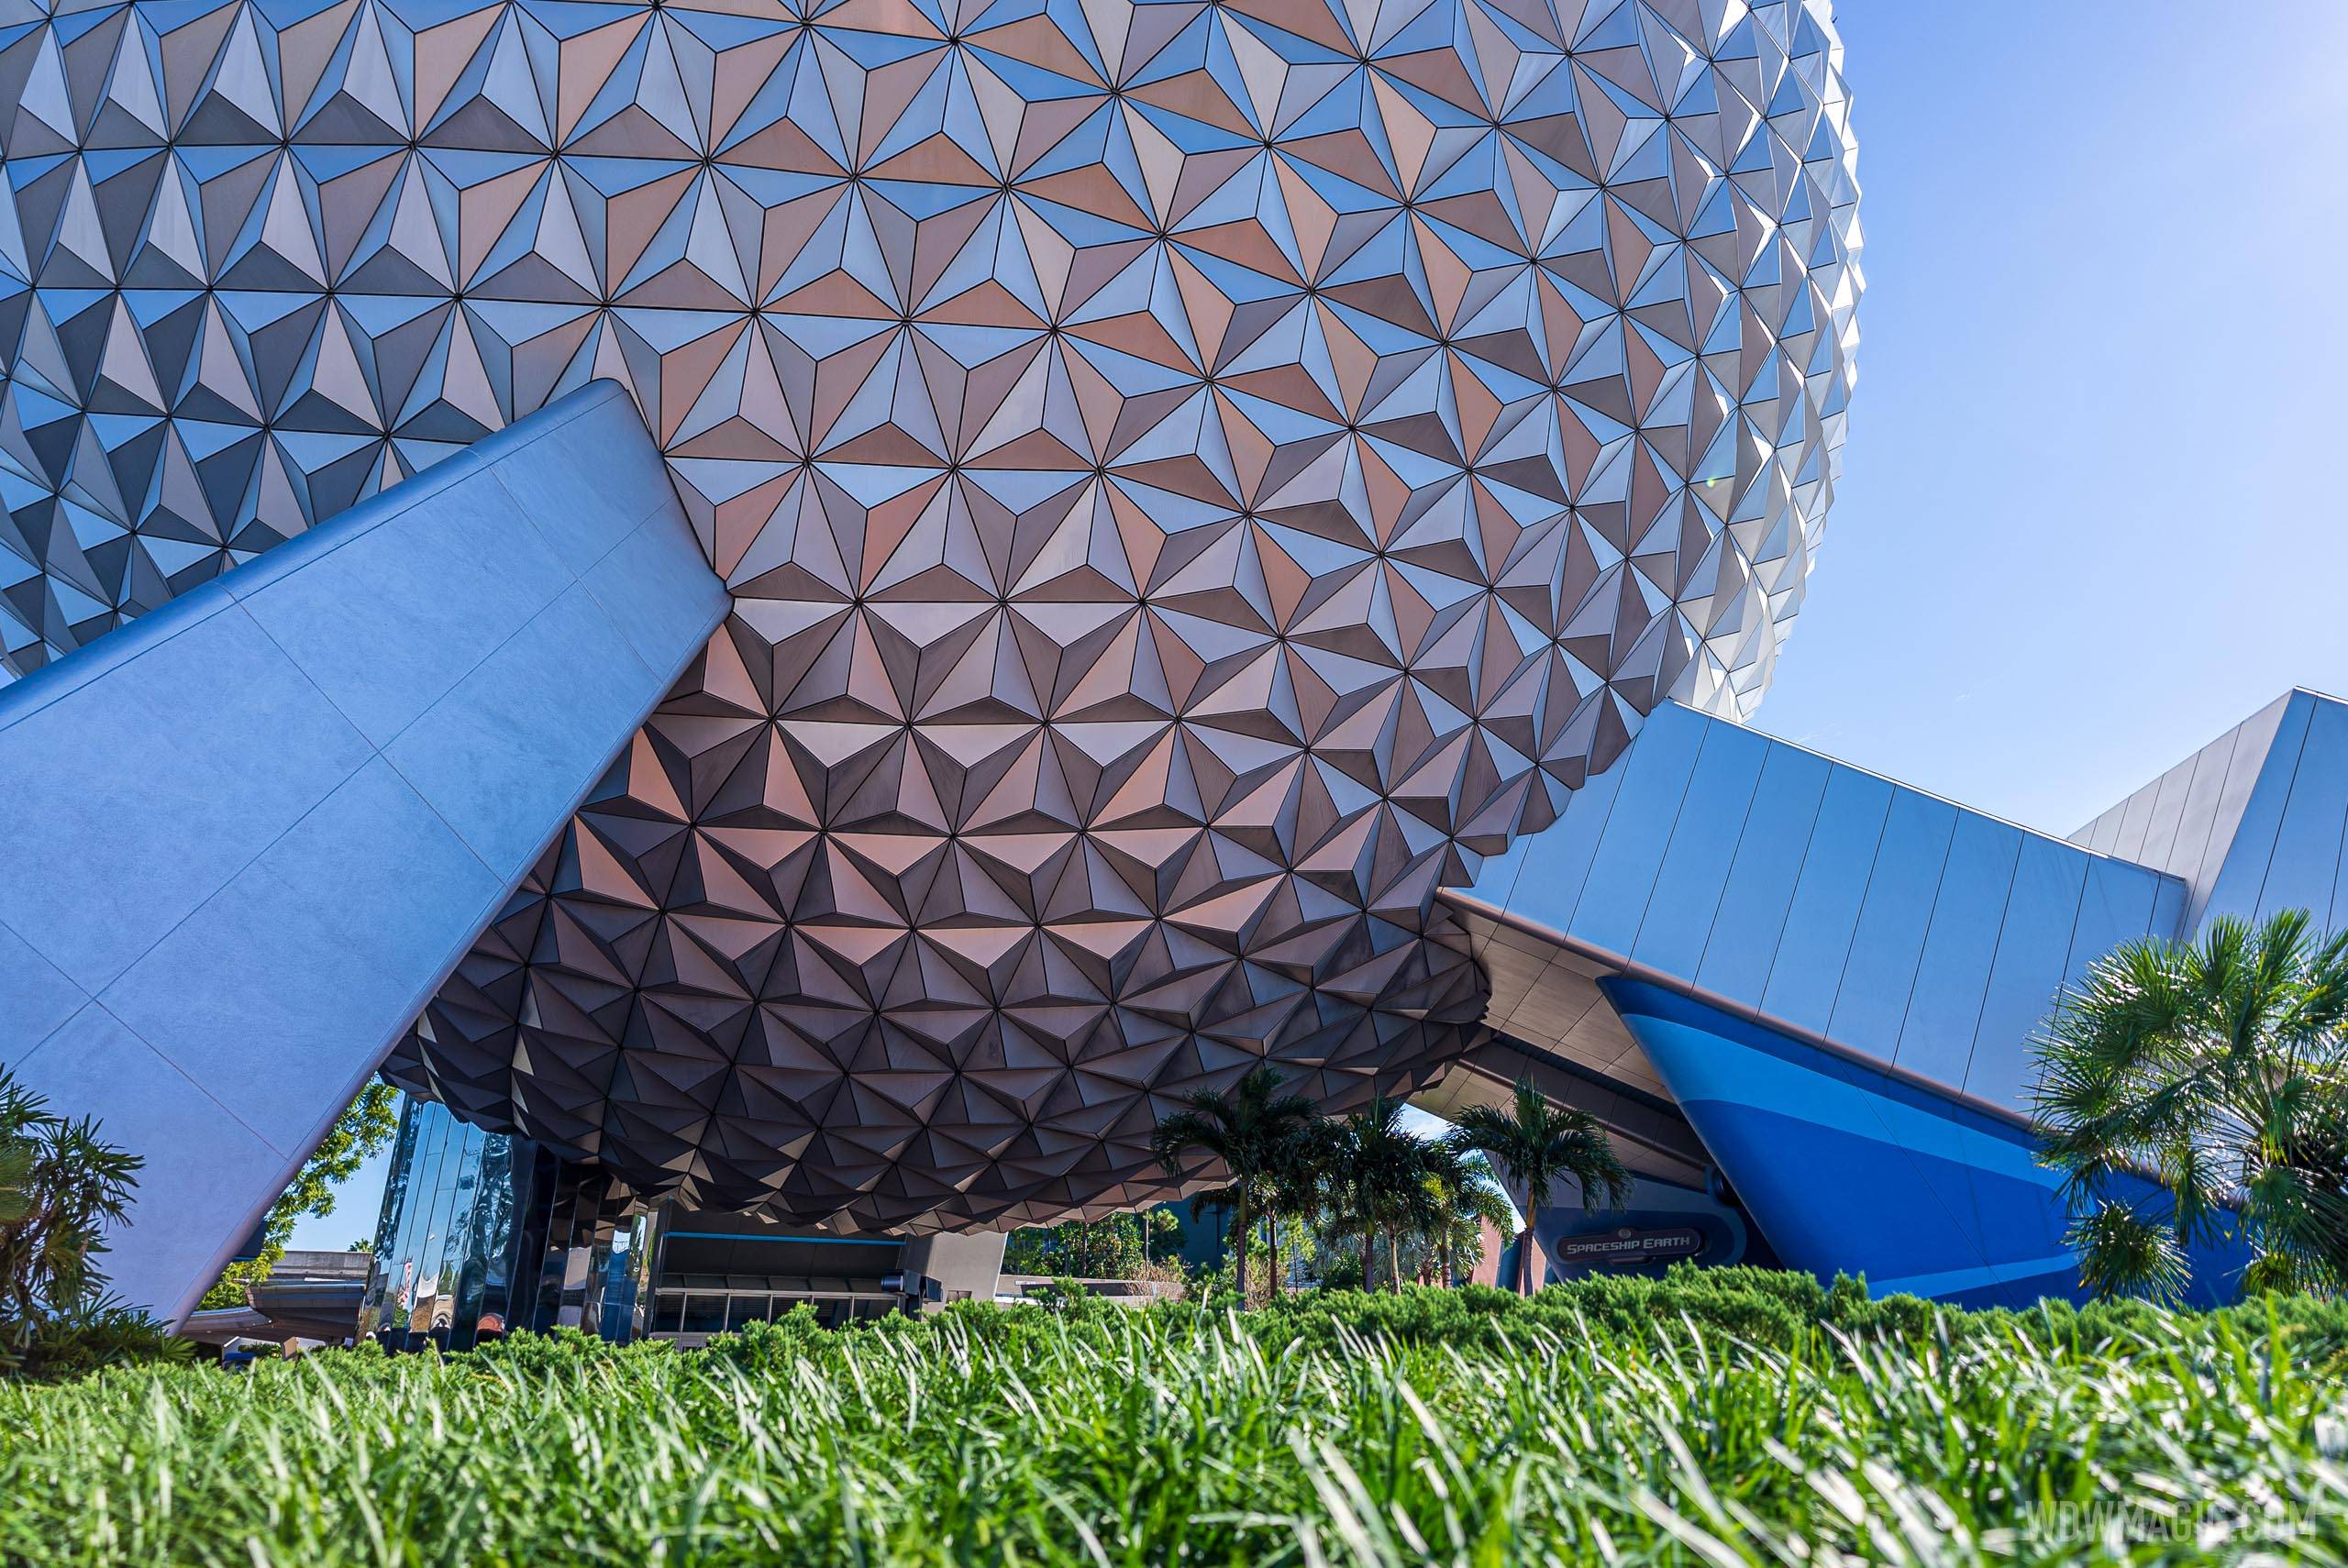 Spaceship Earth at EPCOT closing for brief refurbishment in July